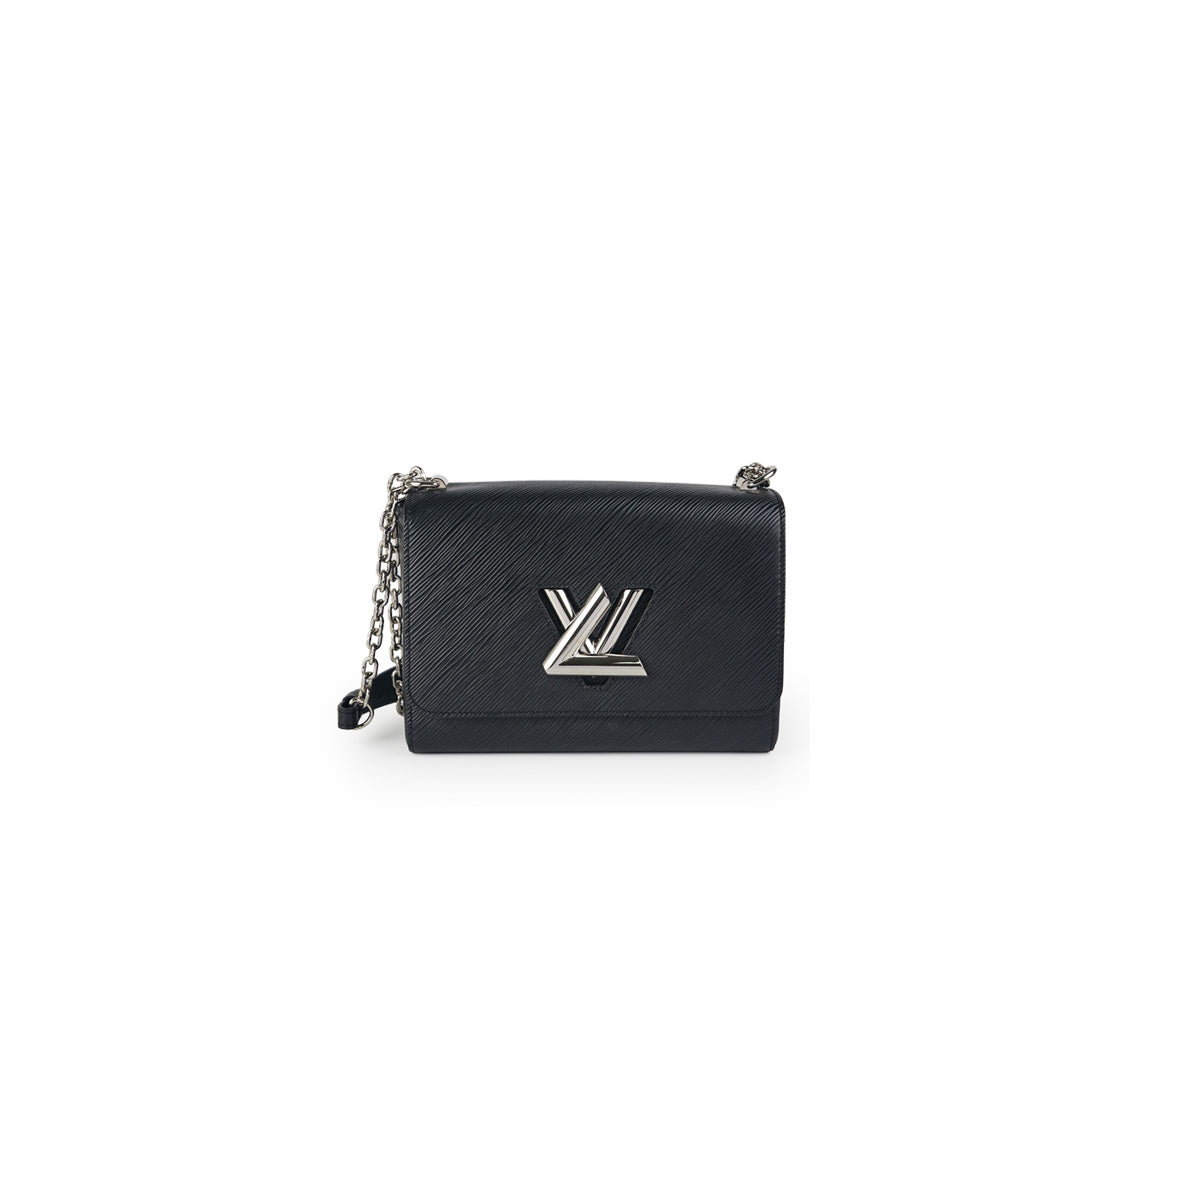 xiaomaluxe - Louis Vuitton Twist MM and Twisty Black and